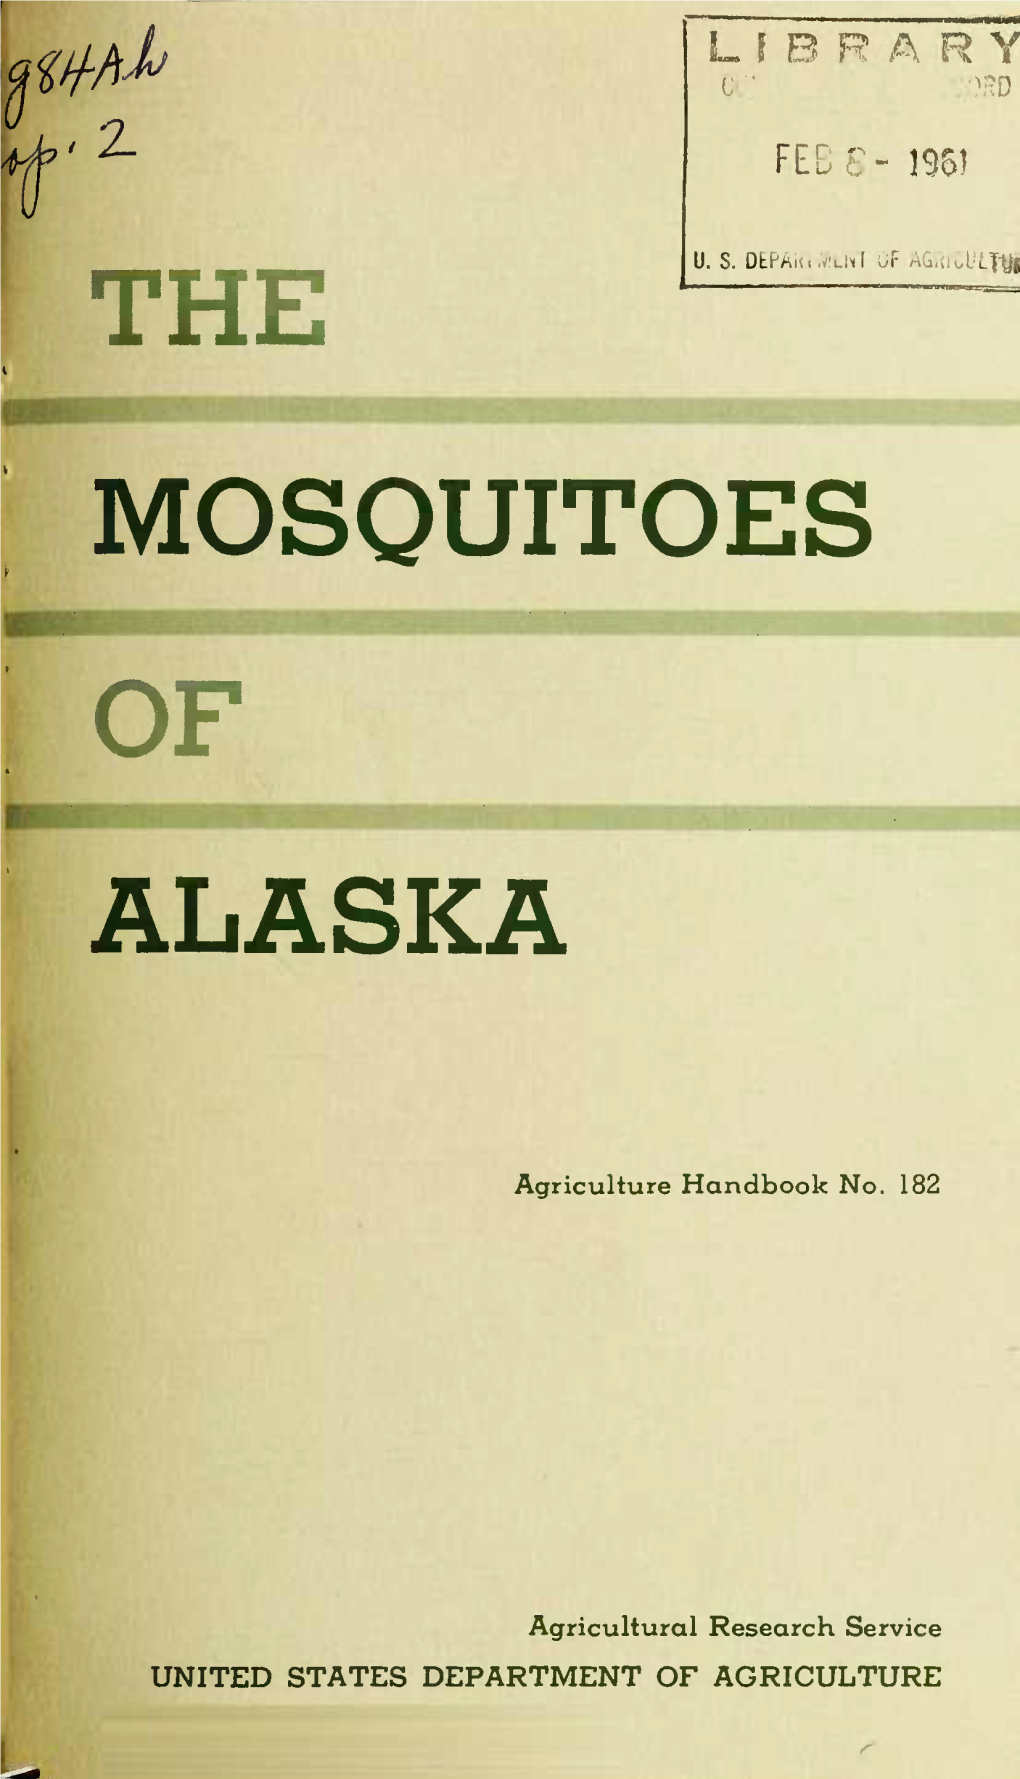 The Mosquitoes of Alaska